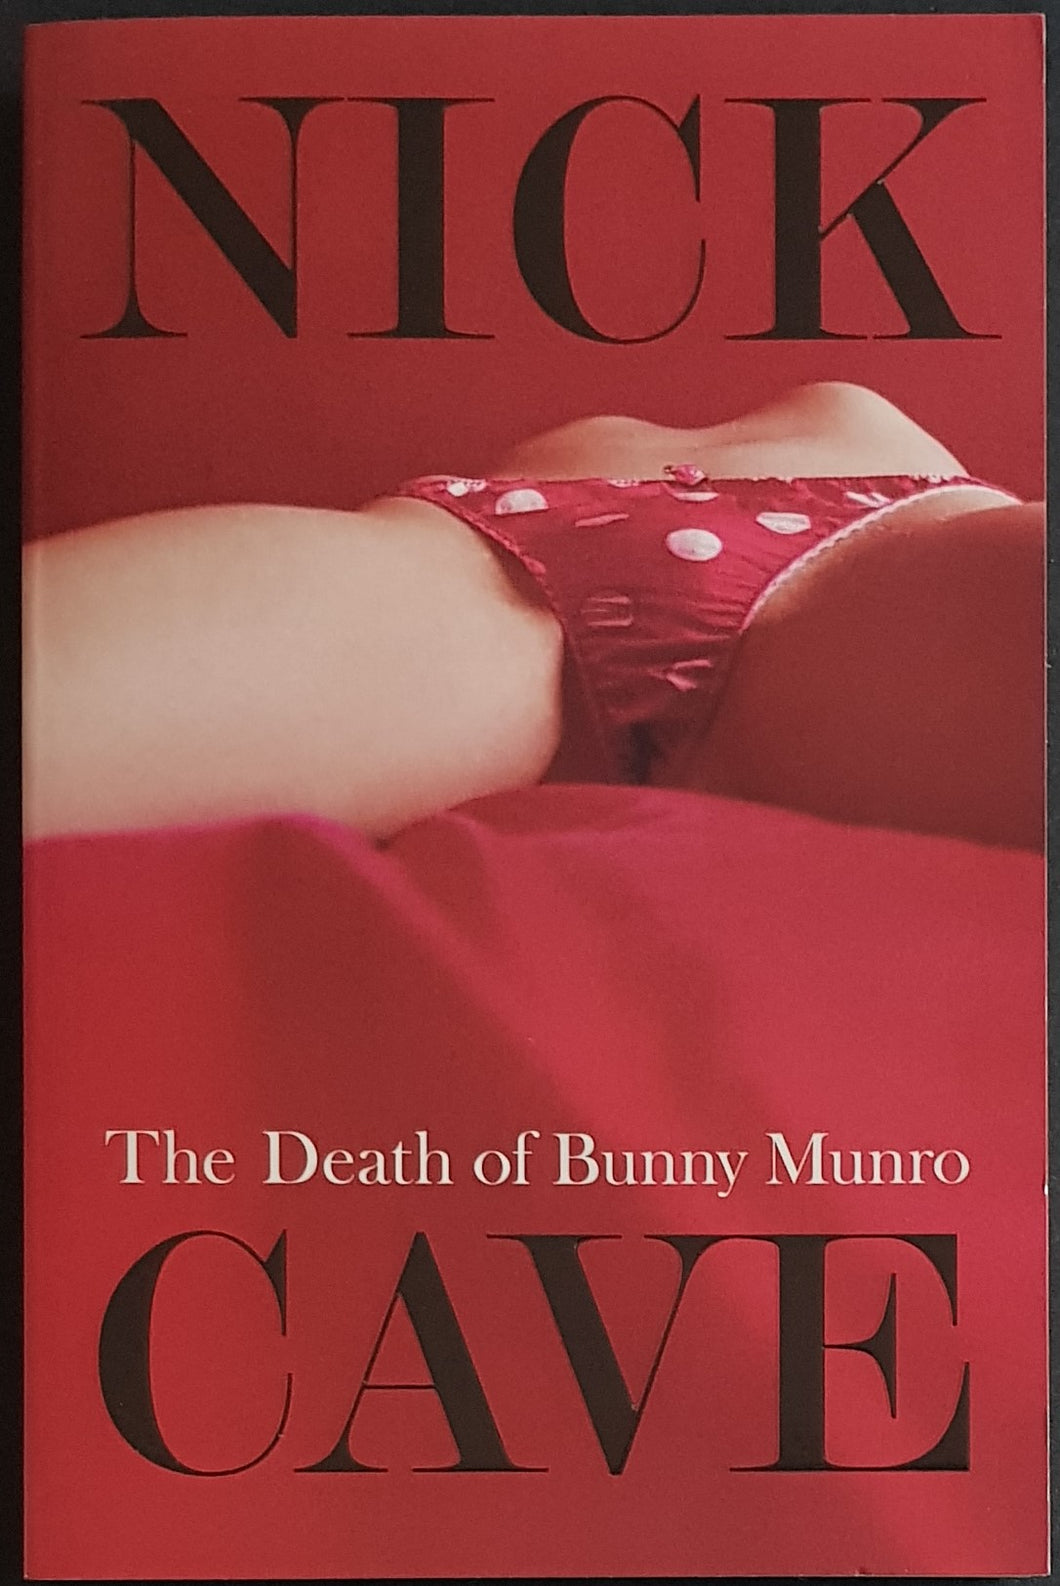 Nick Cave - The Death Of Bunny Monro